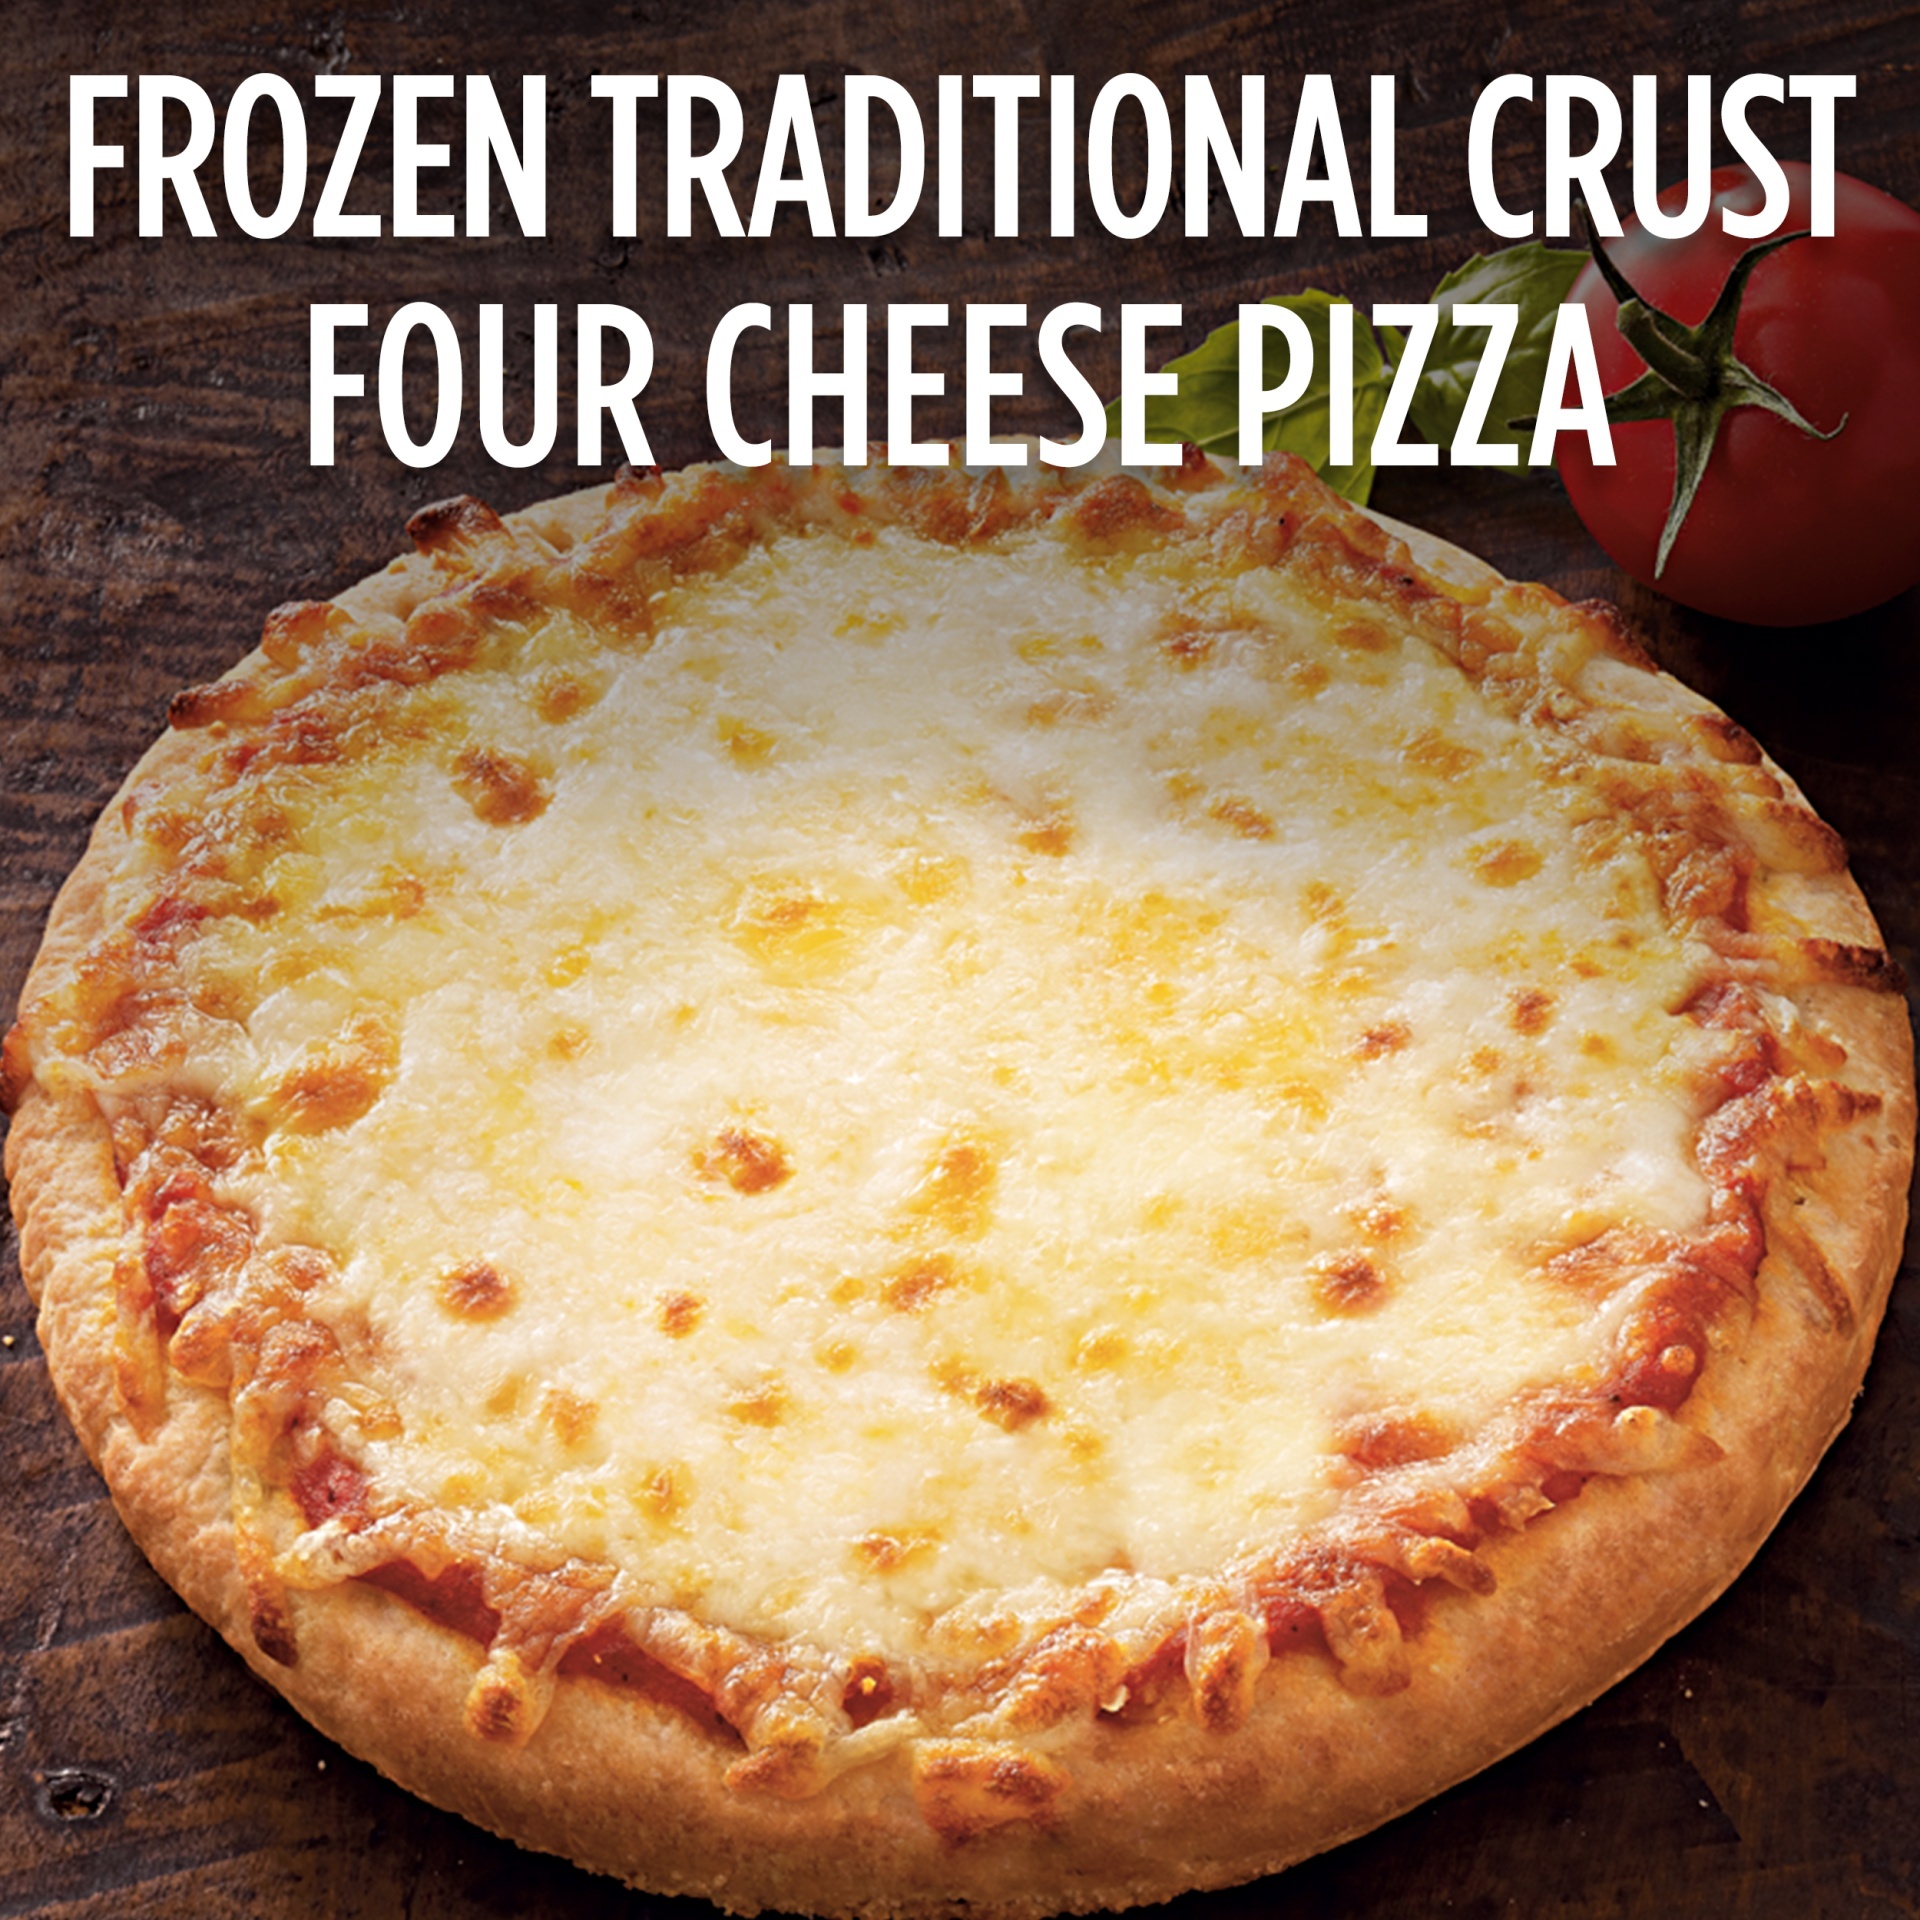 slide 9 of 13, DIGIORNO Frozen Four Cheese Personal Pizza on a Traditional Crust, 9.2 oz